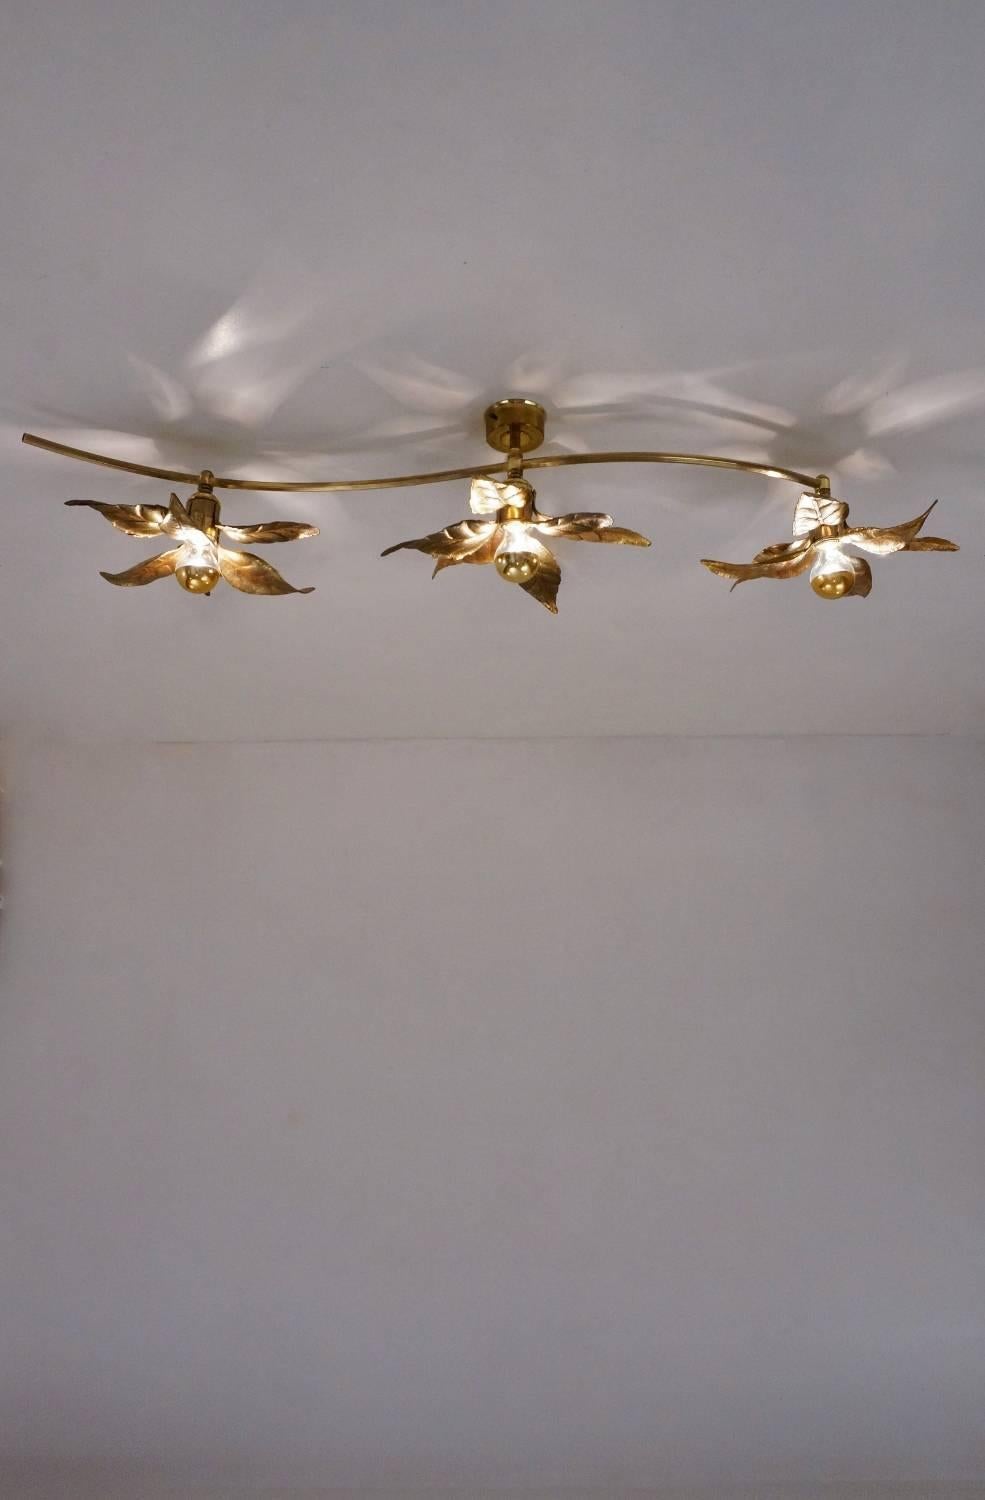 Late 20th Century Brass Flowers Ceiling or Wall Light by Massive Lighting, circa 1970s, Belgian